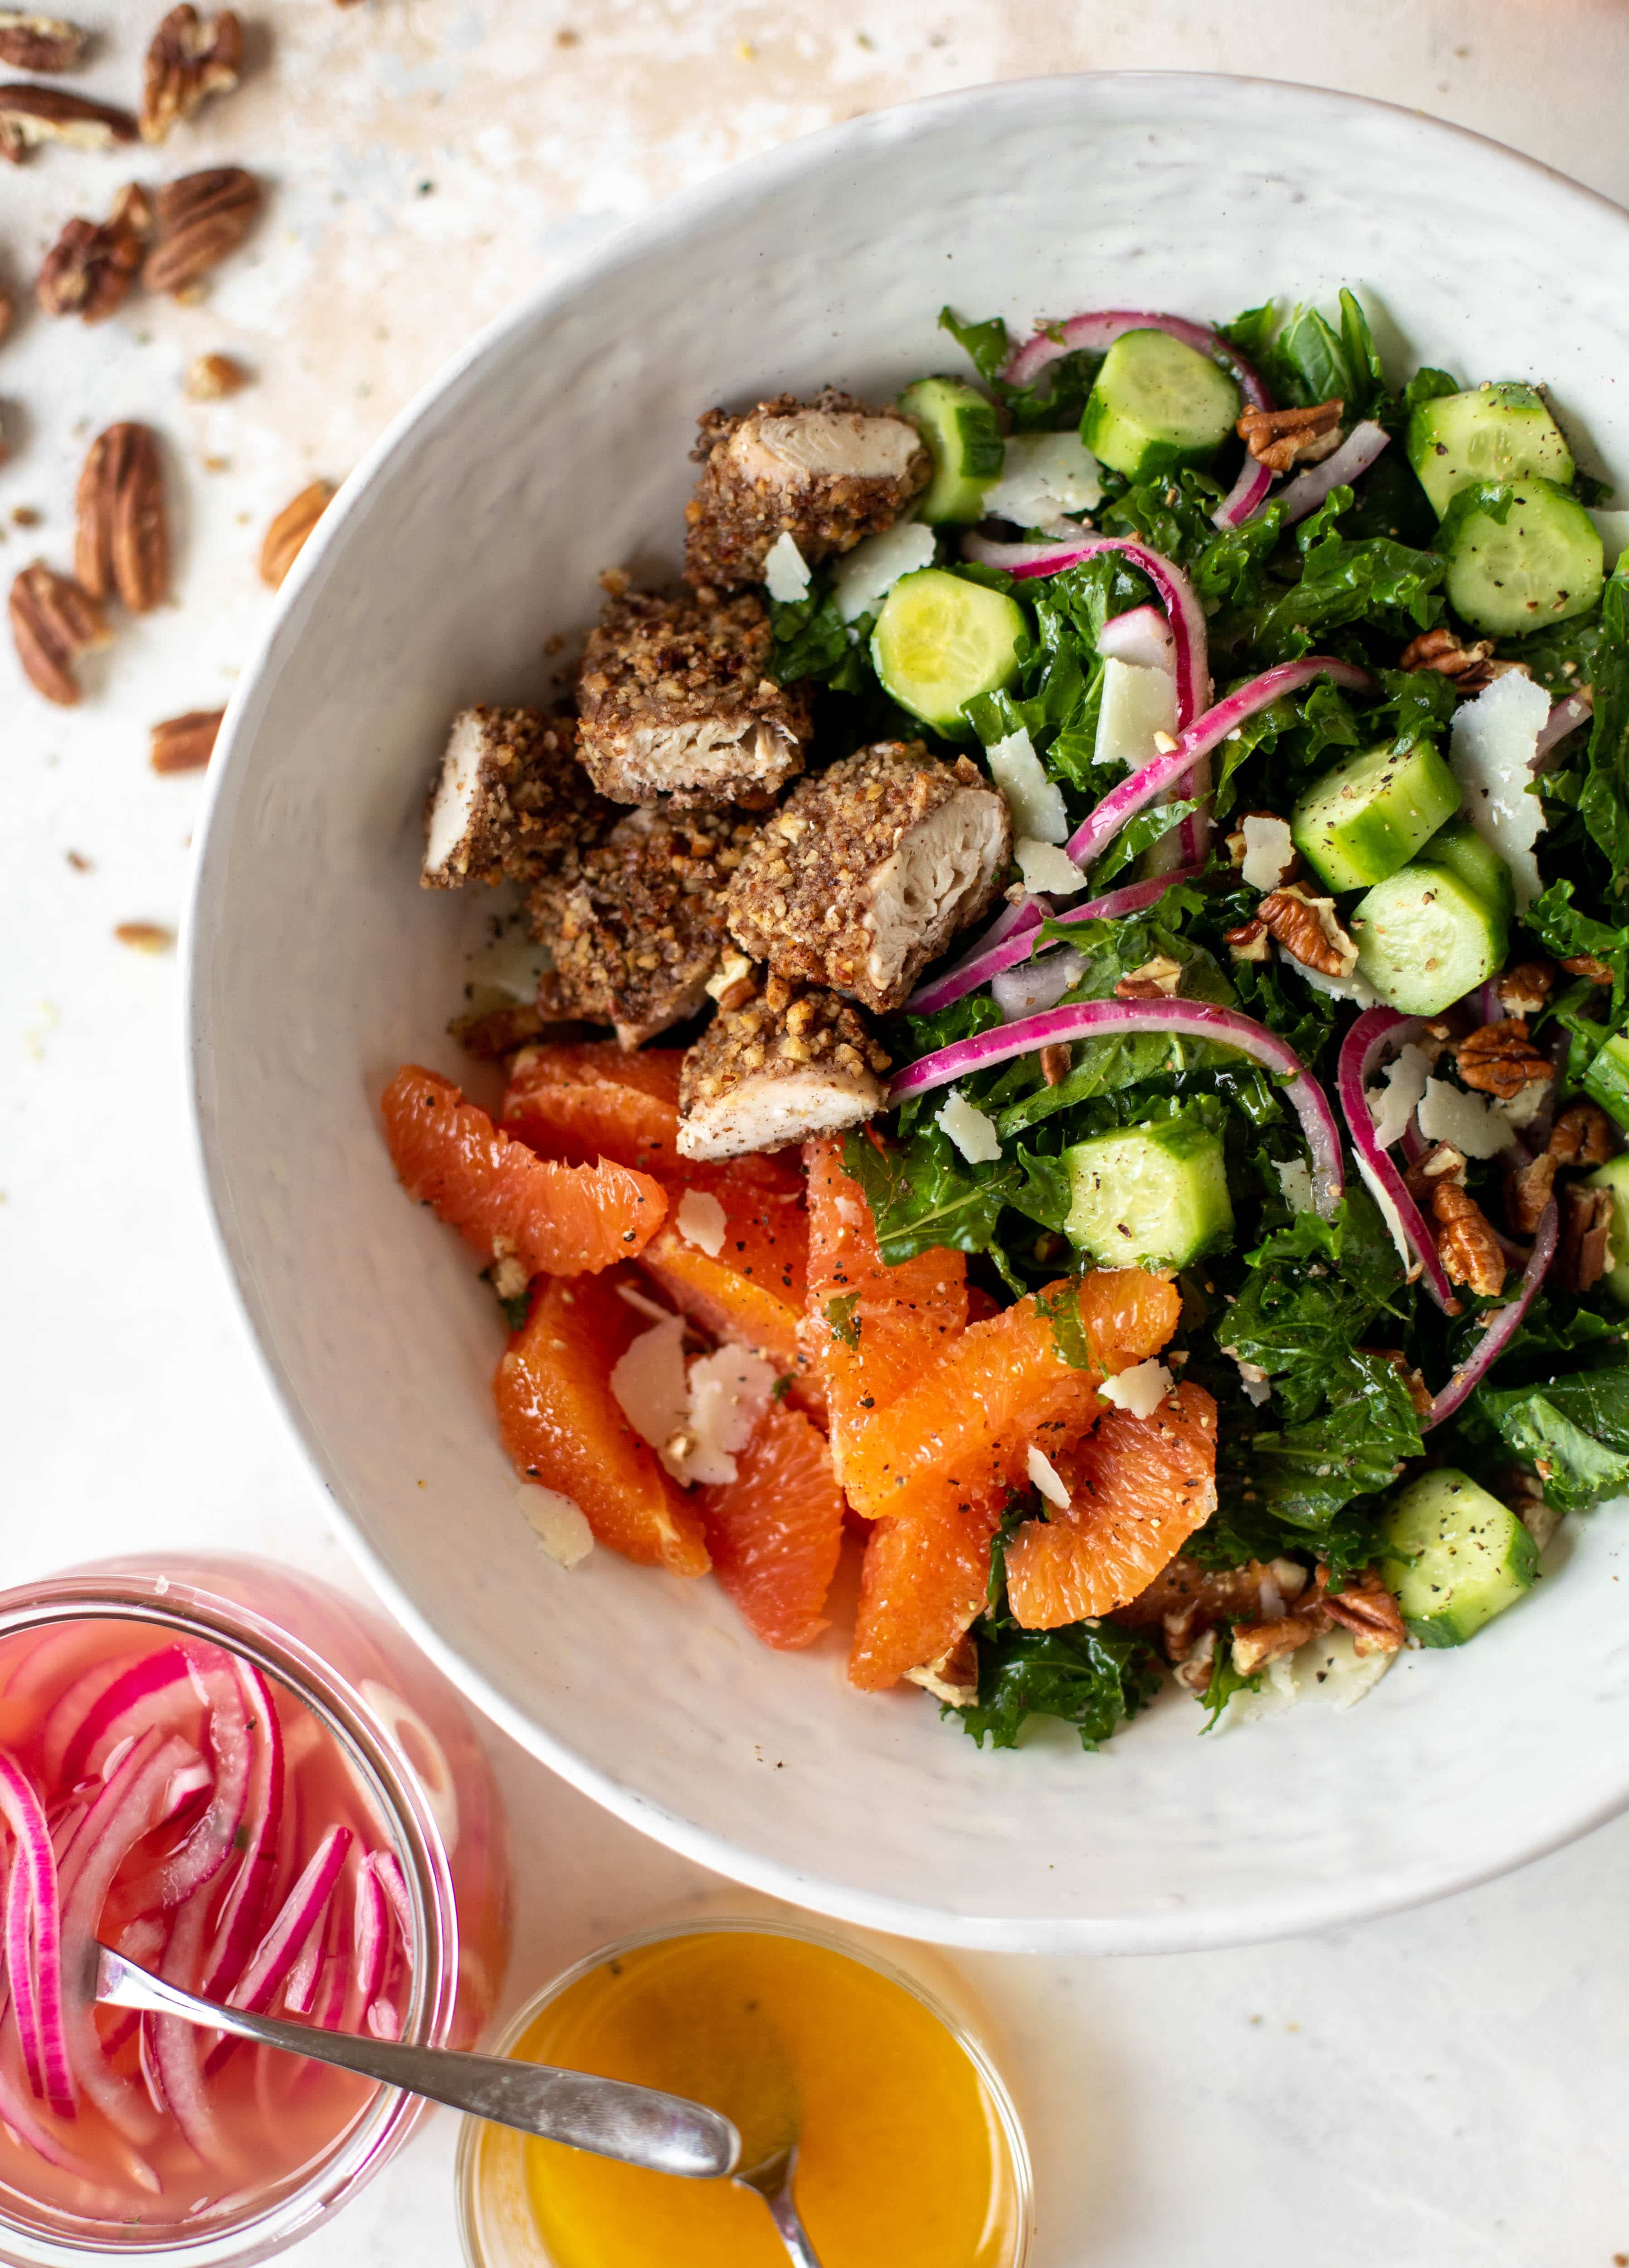 This pecan crusted chicken salad is so hearty! Kale, cara cara oranges, pickled onions, cucumbers and pecorino make this a bowl of flavor.